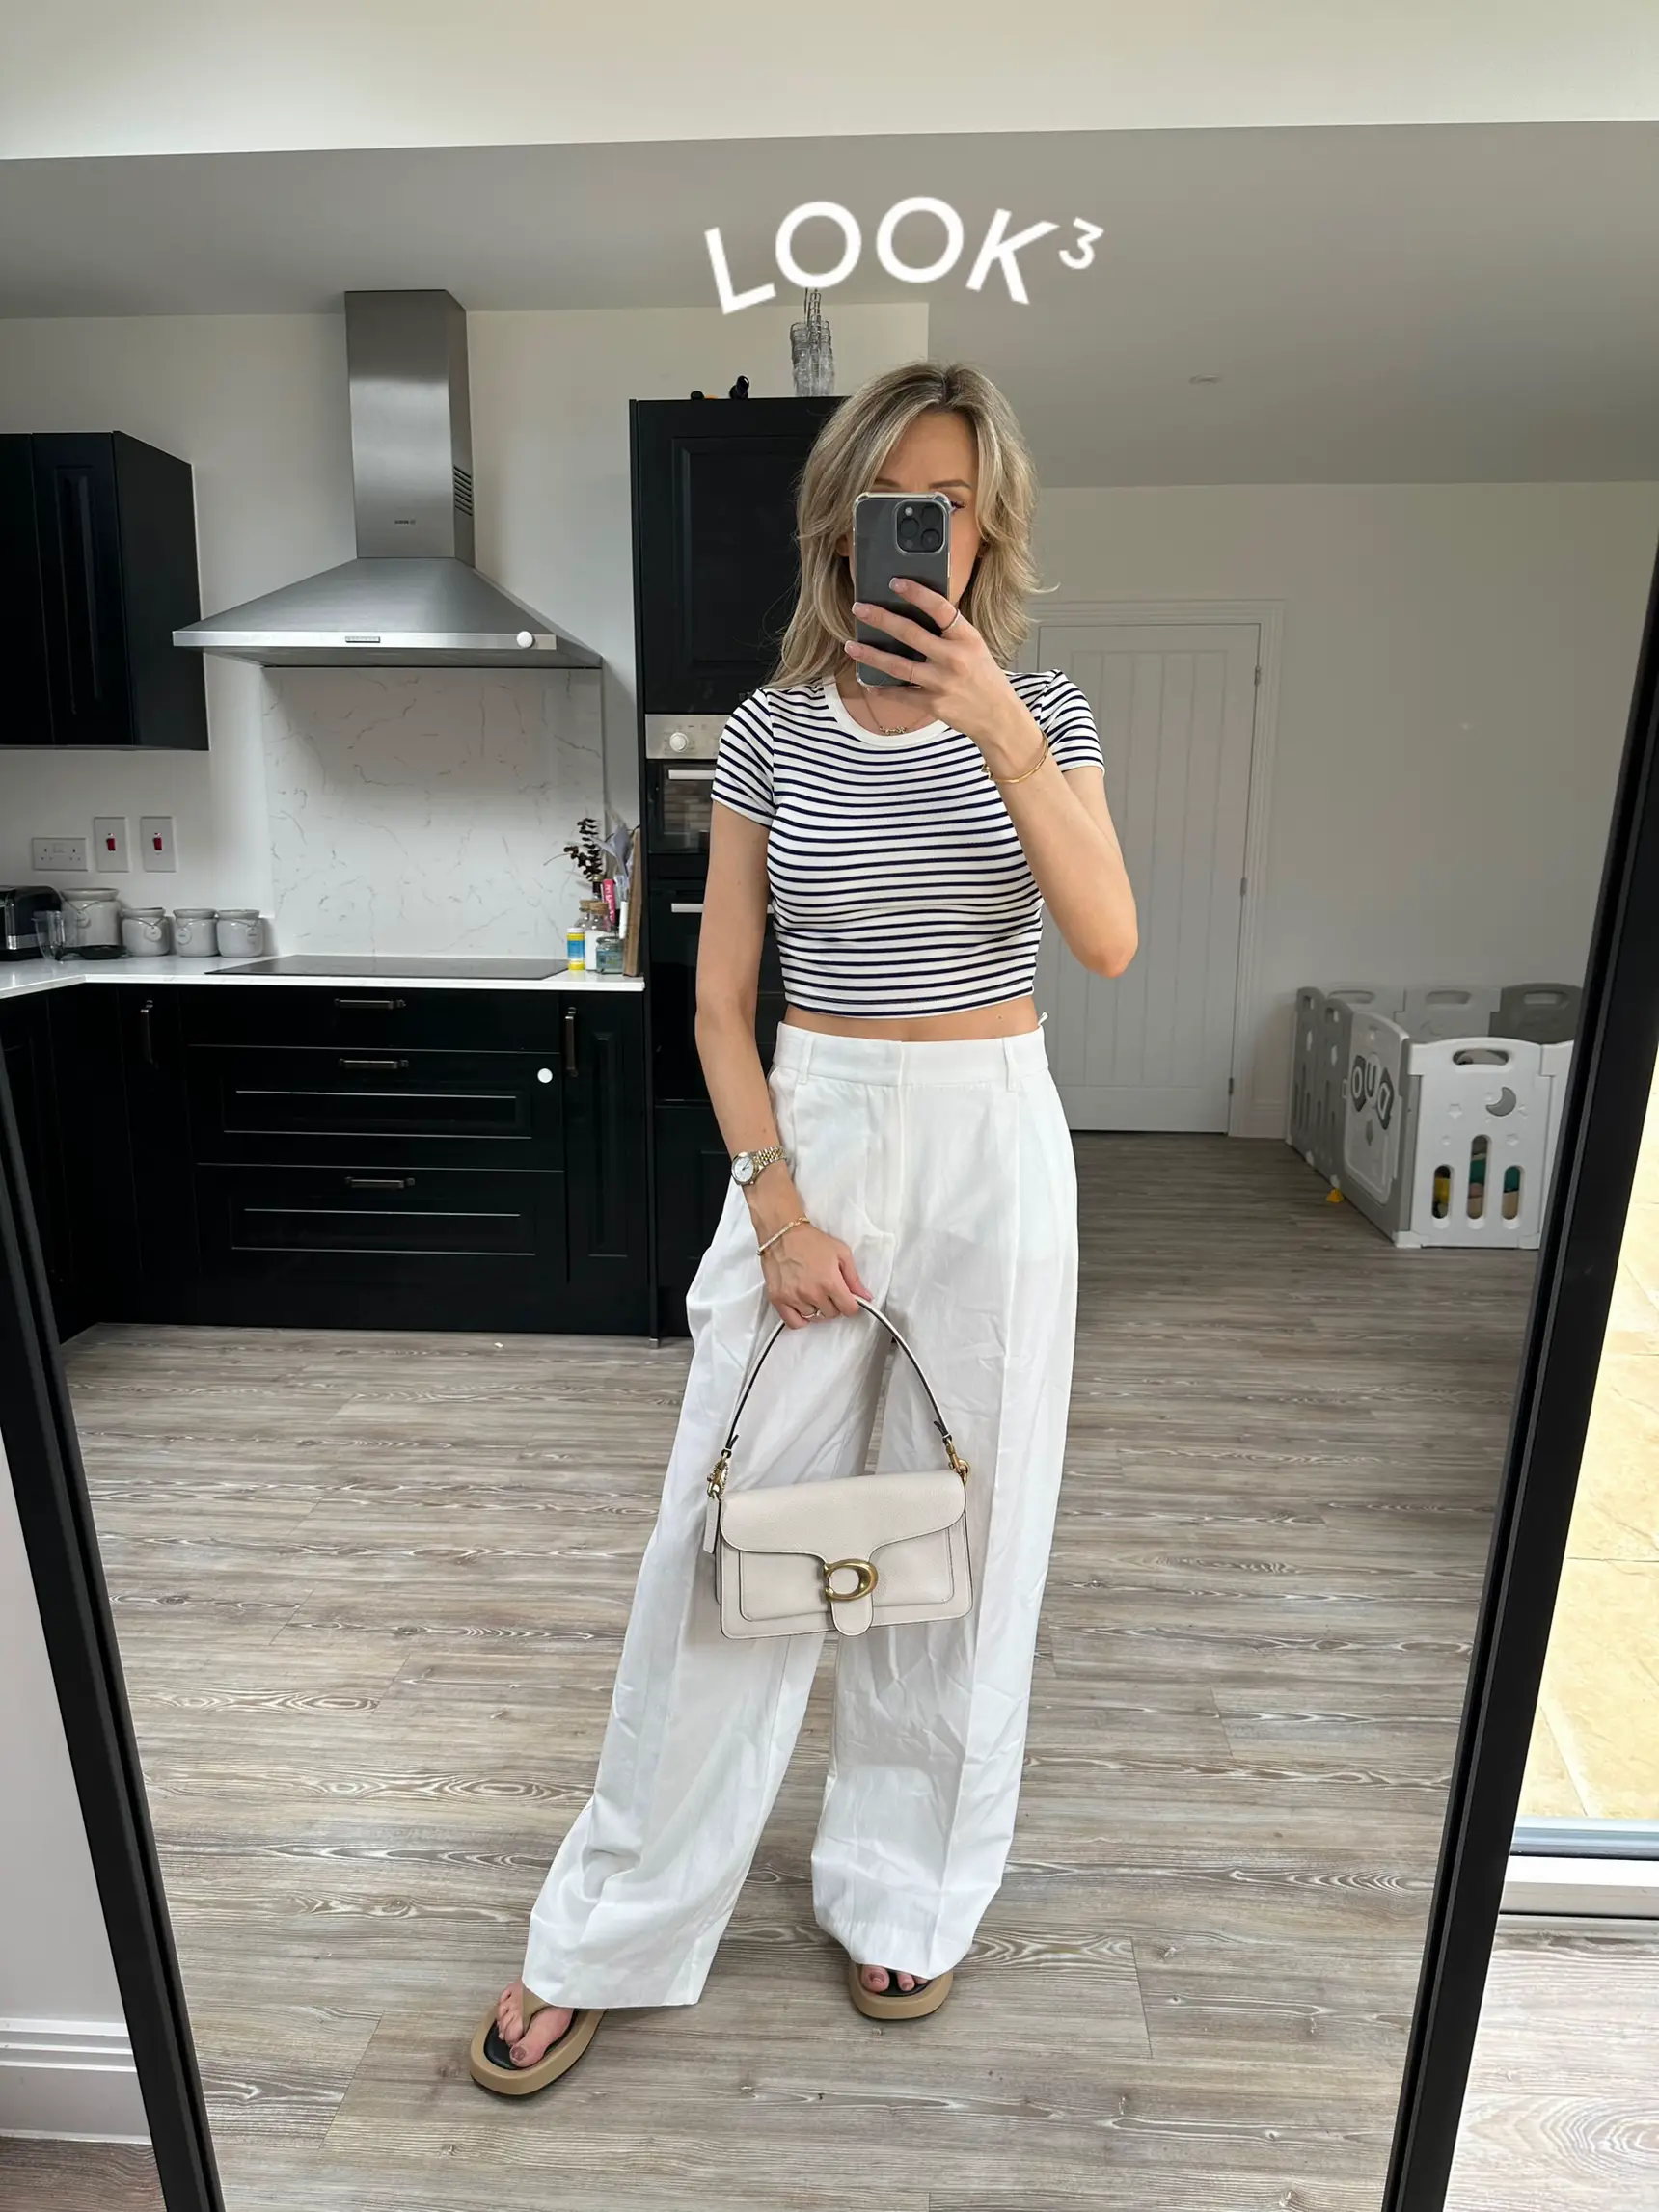 Ways to wear ZARA WHITE WIDE LEG TROUSERS 🤍, Gallery posted by Natalie  Sian